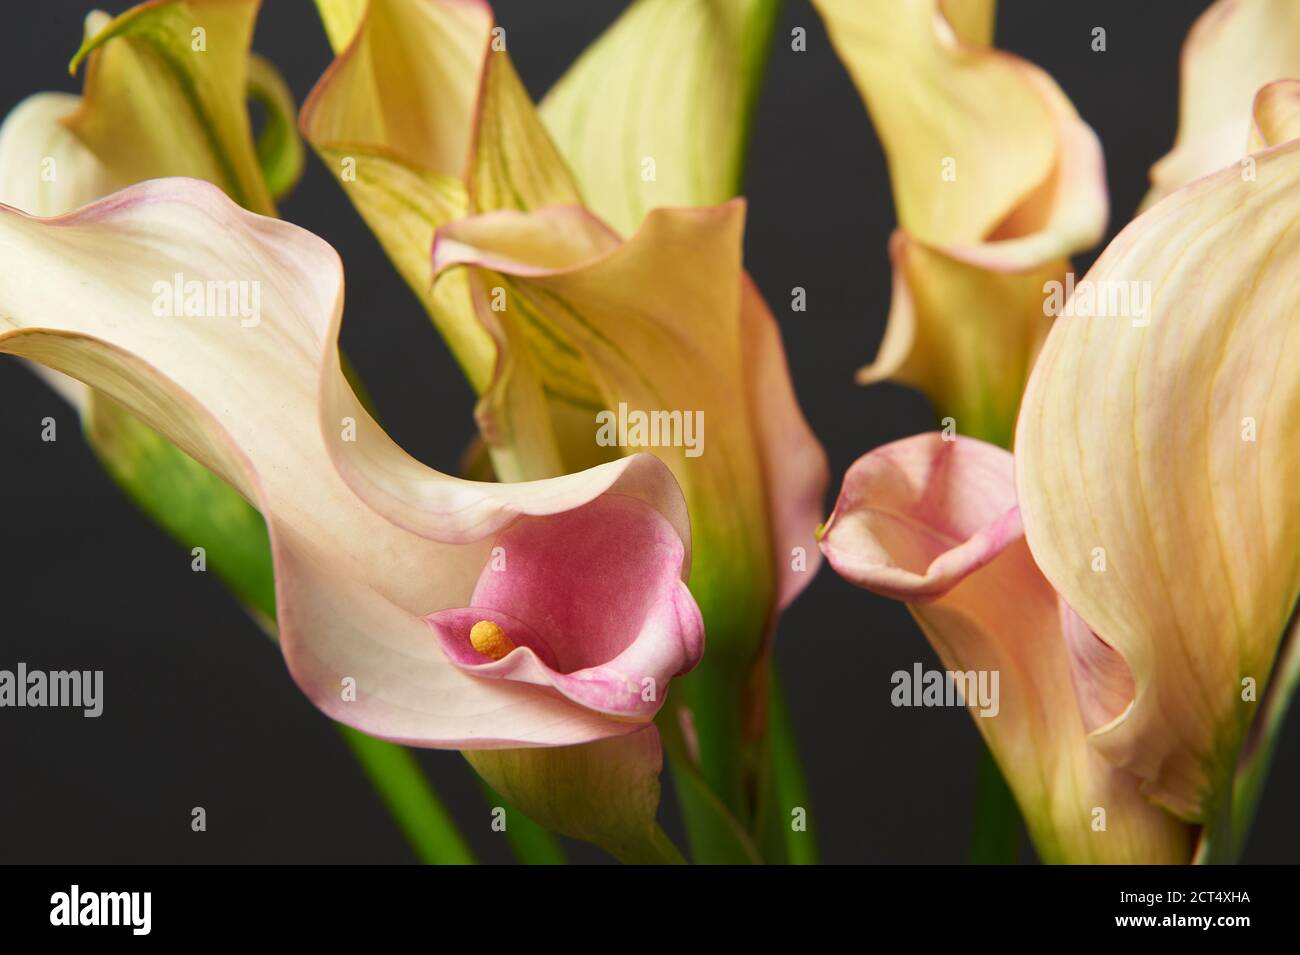 Bouquet of Red and Yellow Calla Lilies. Close-up photo. Stock Photo